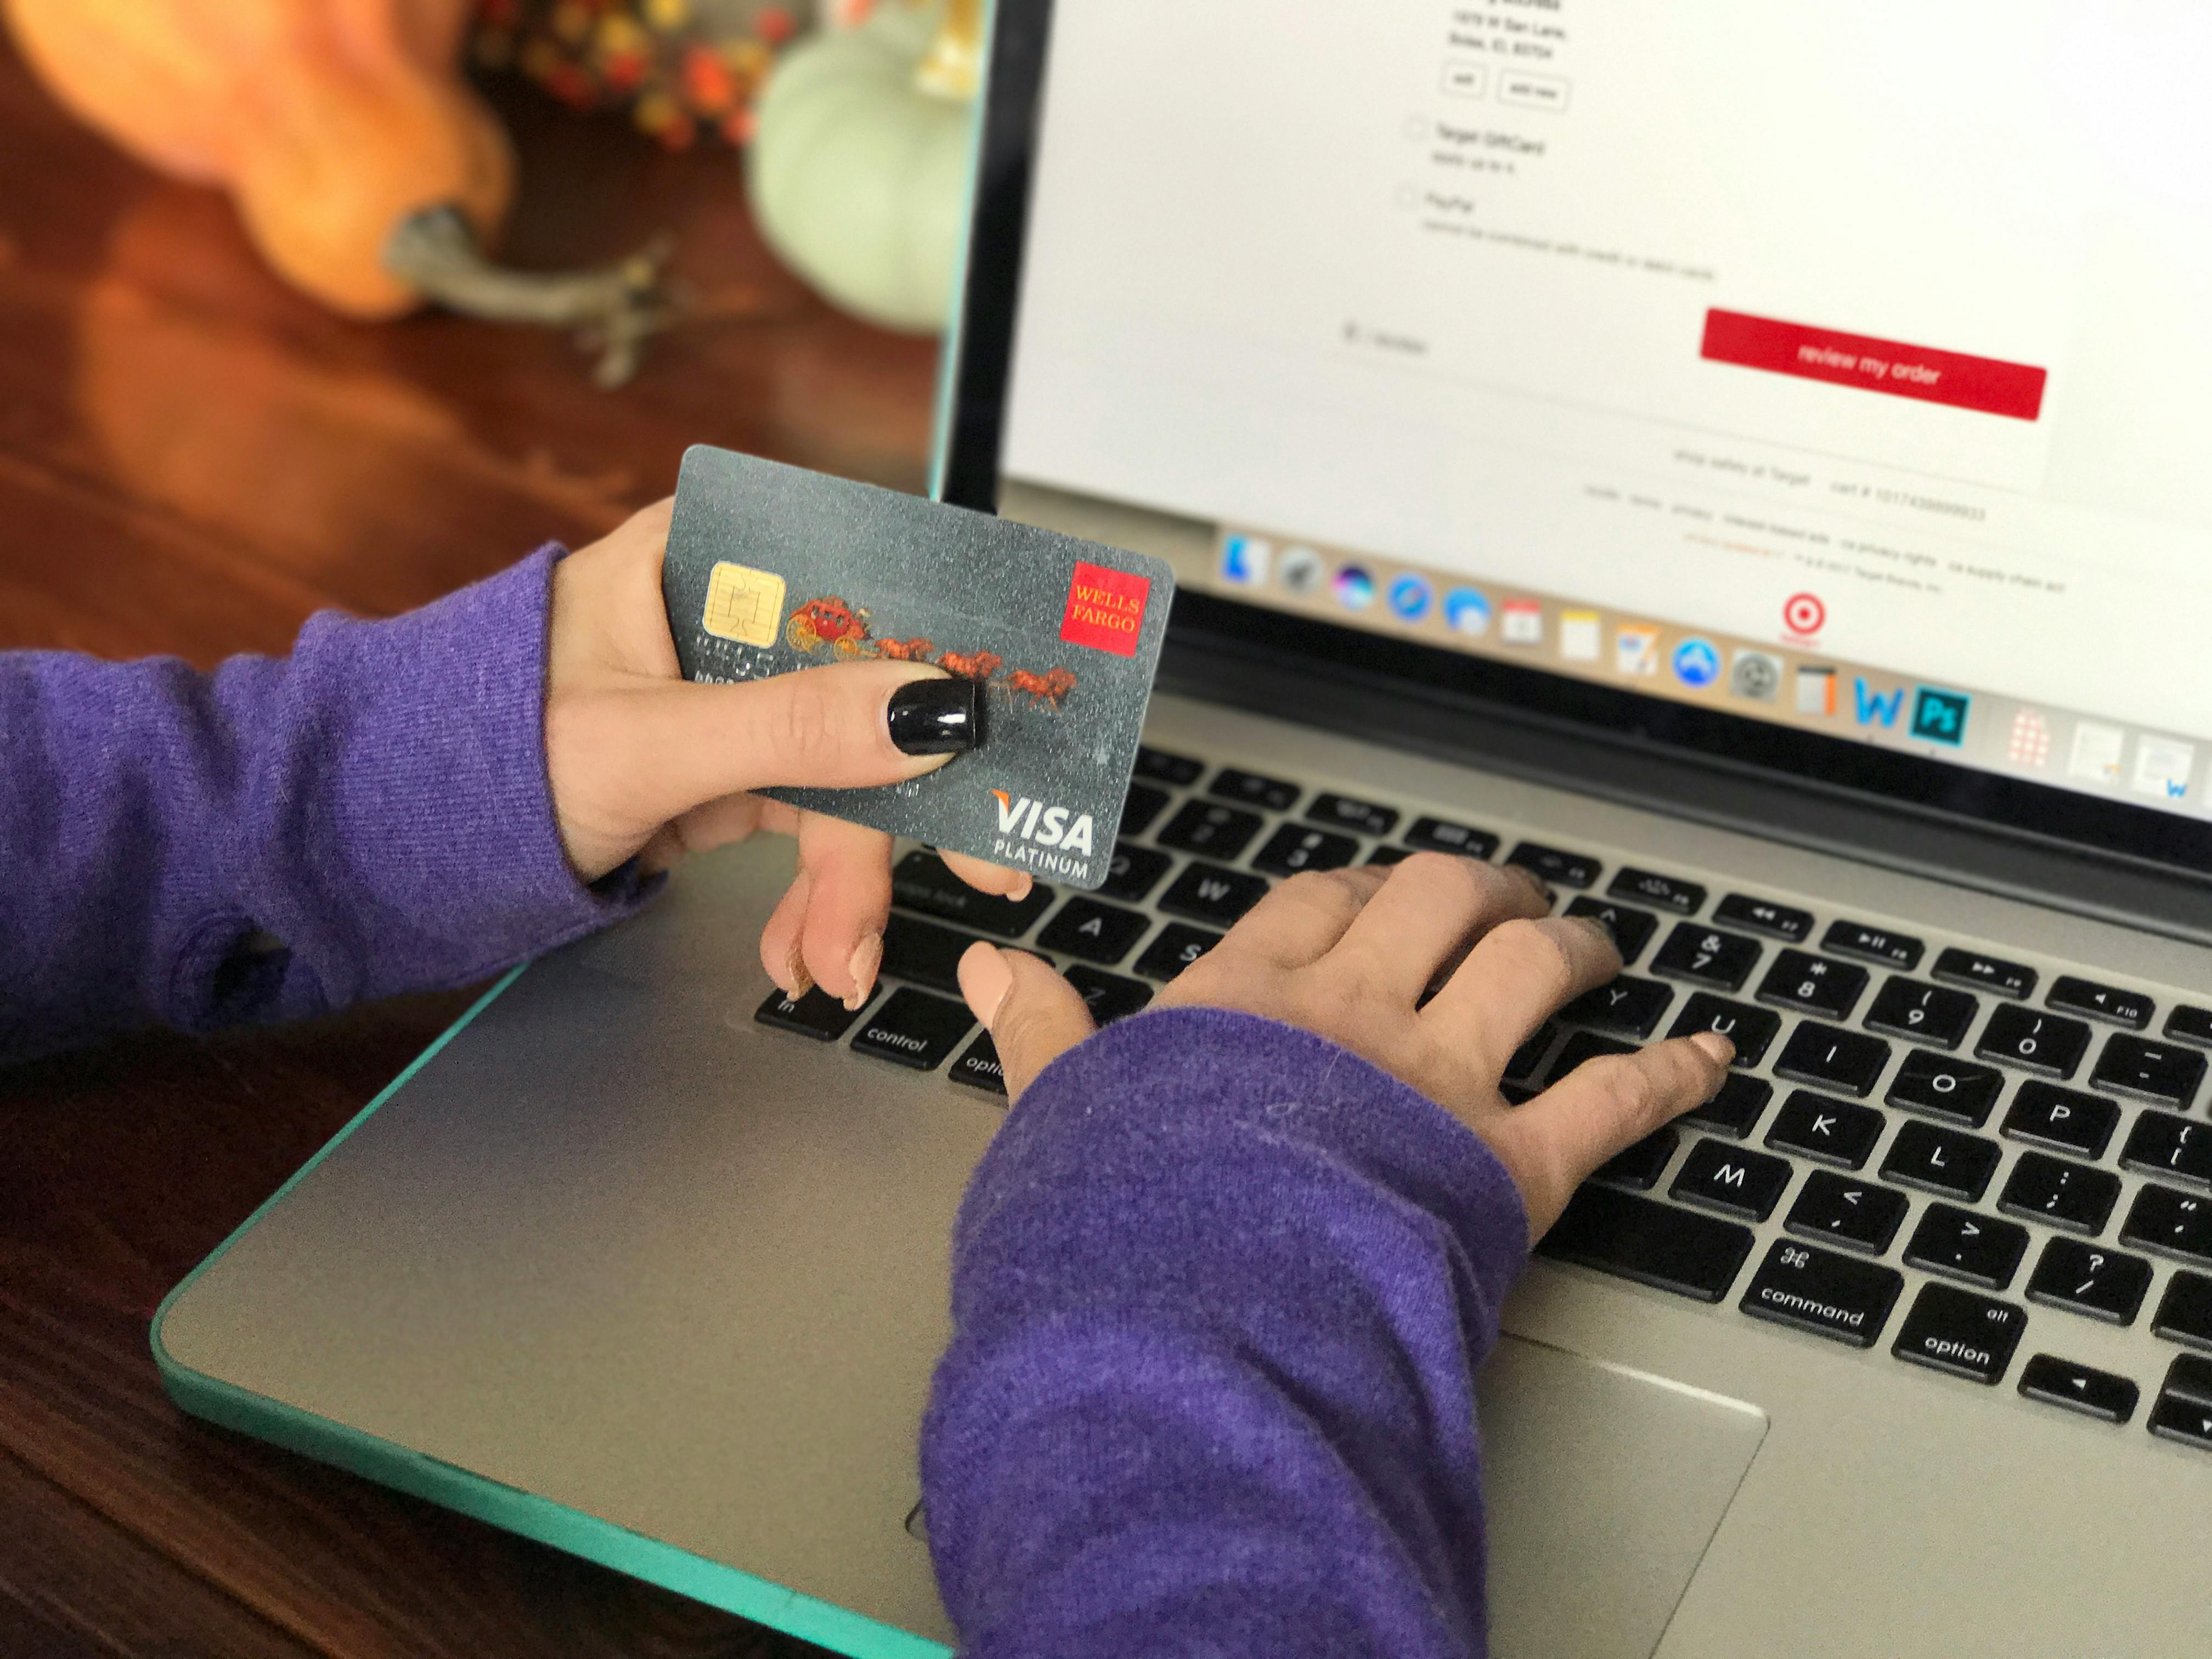 A person using a laptop, holding their credit card.